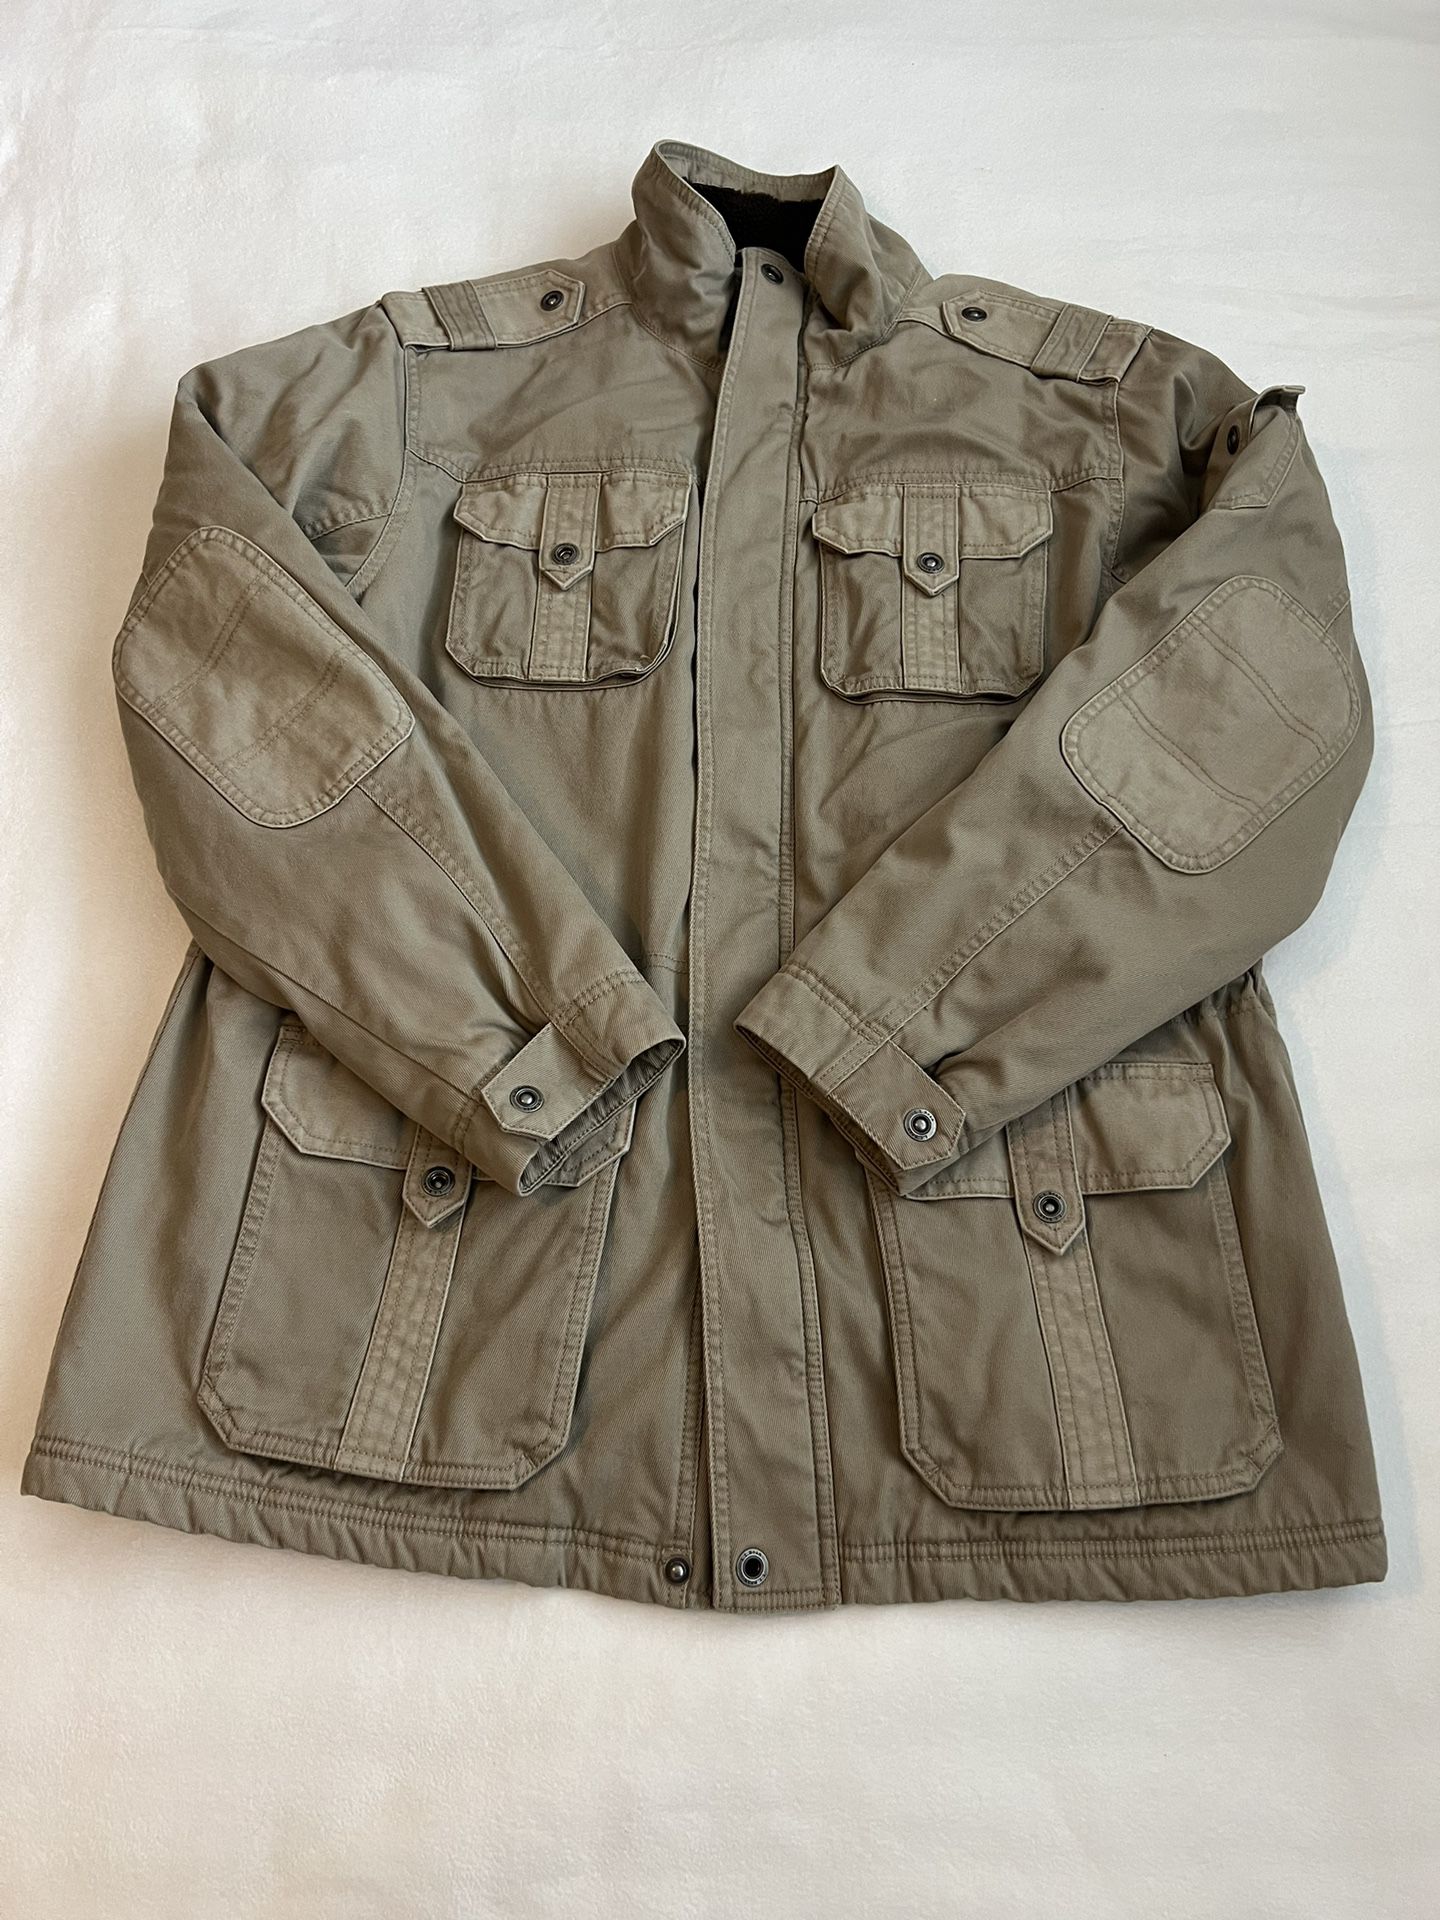 LL Bean Distressed Beige military Style Field Coat Sherpa Lined Thinsulate Sz L